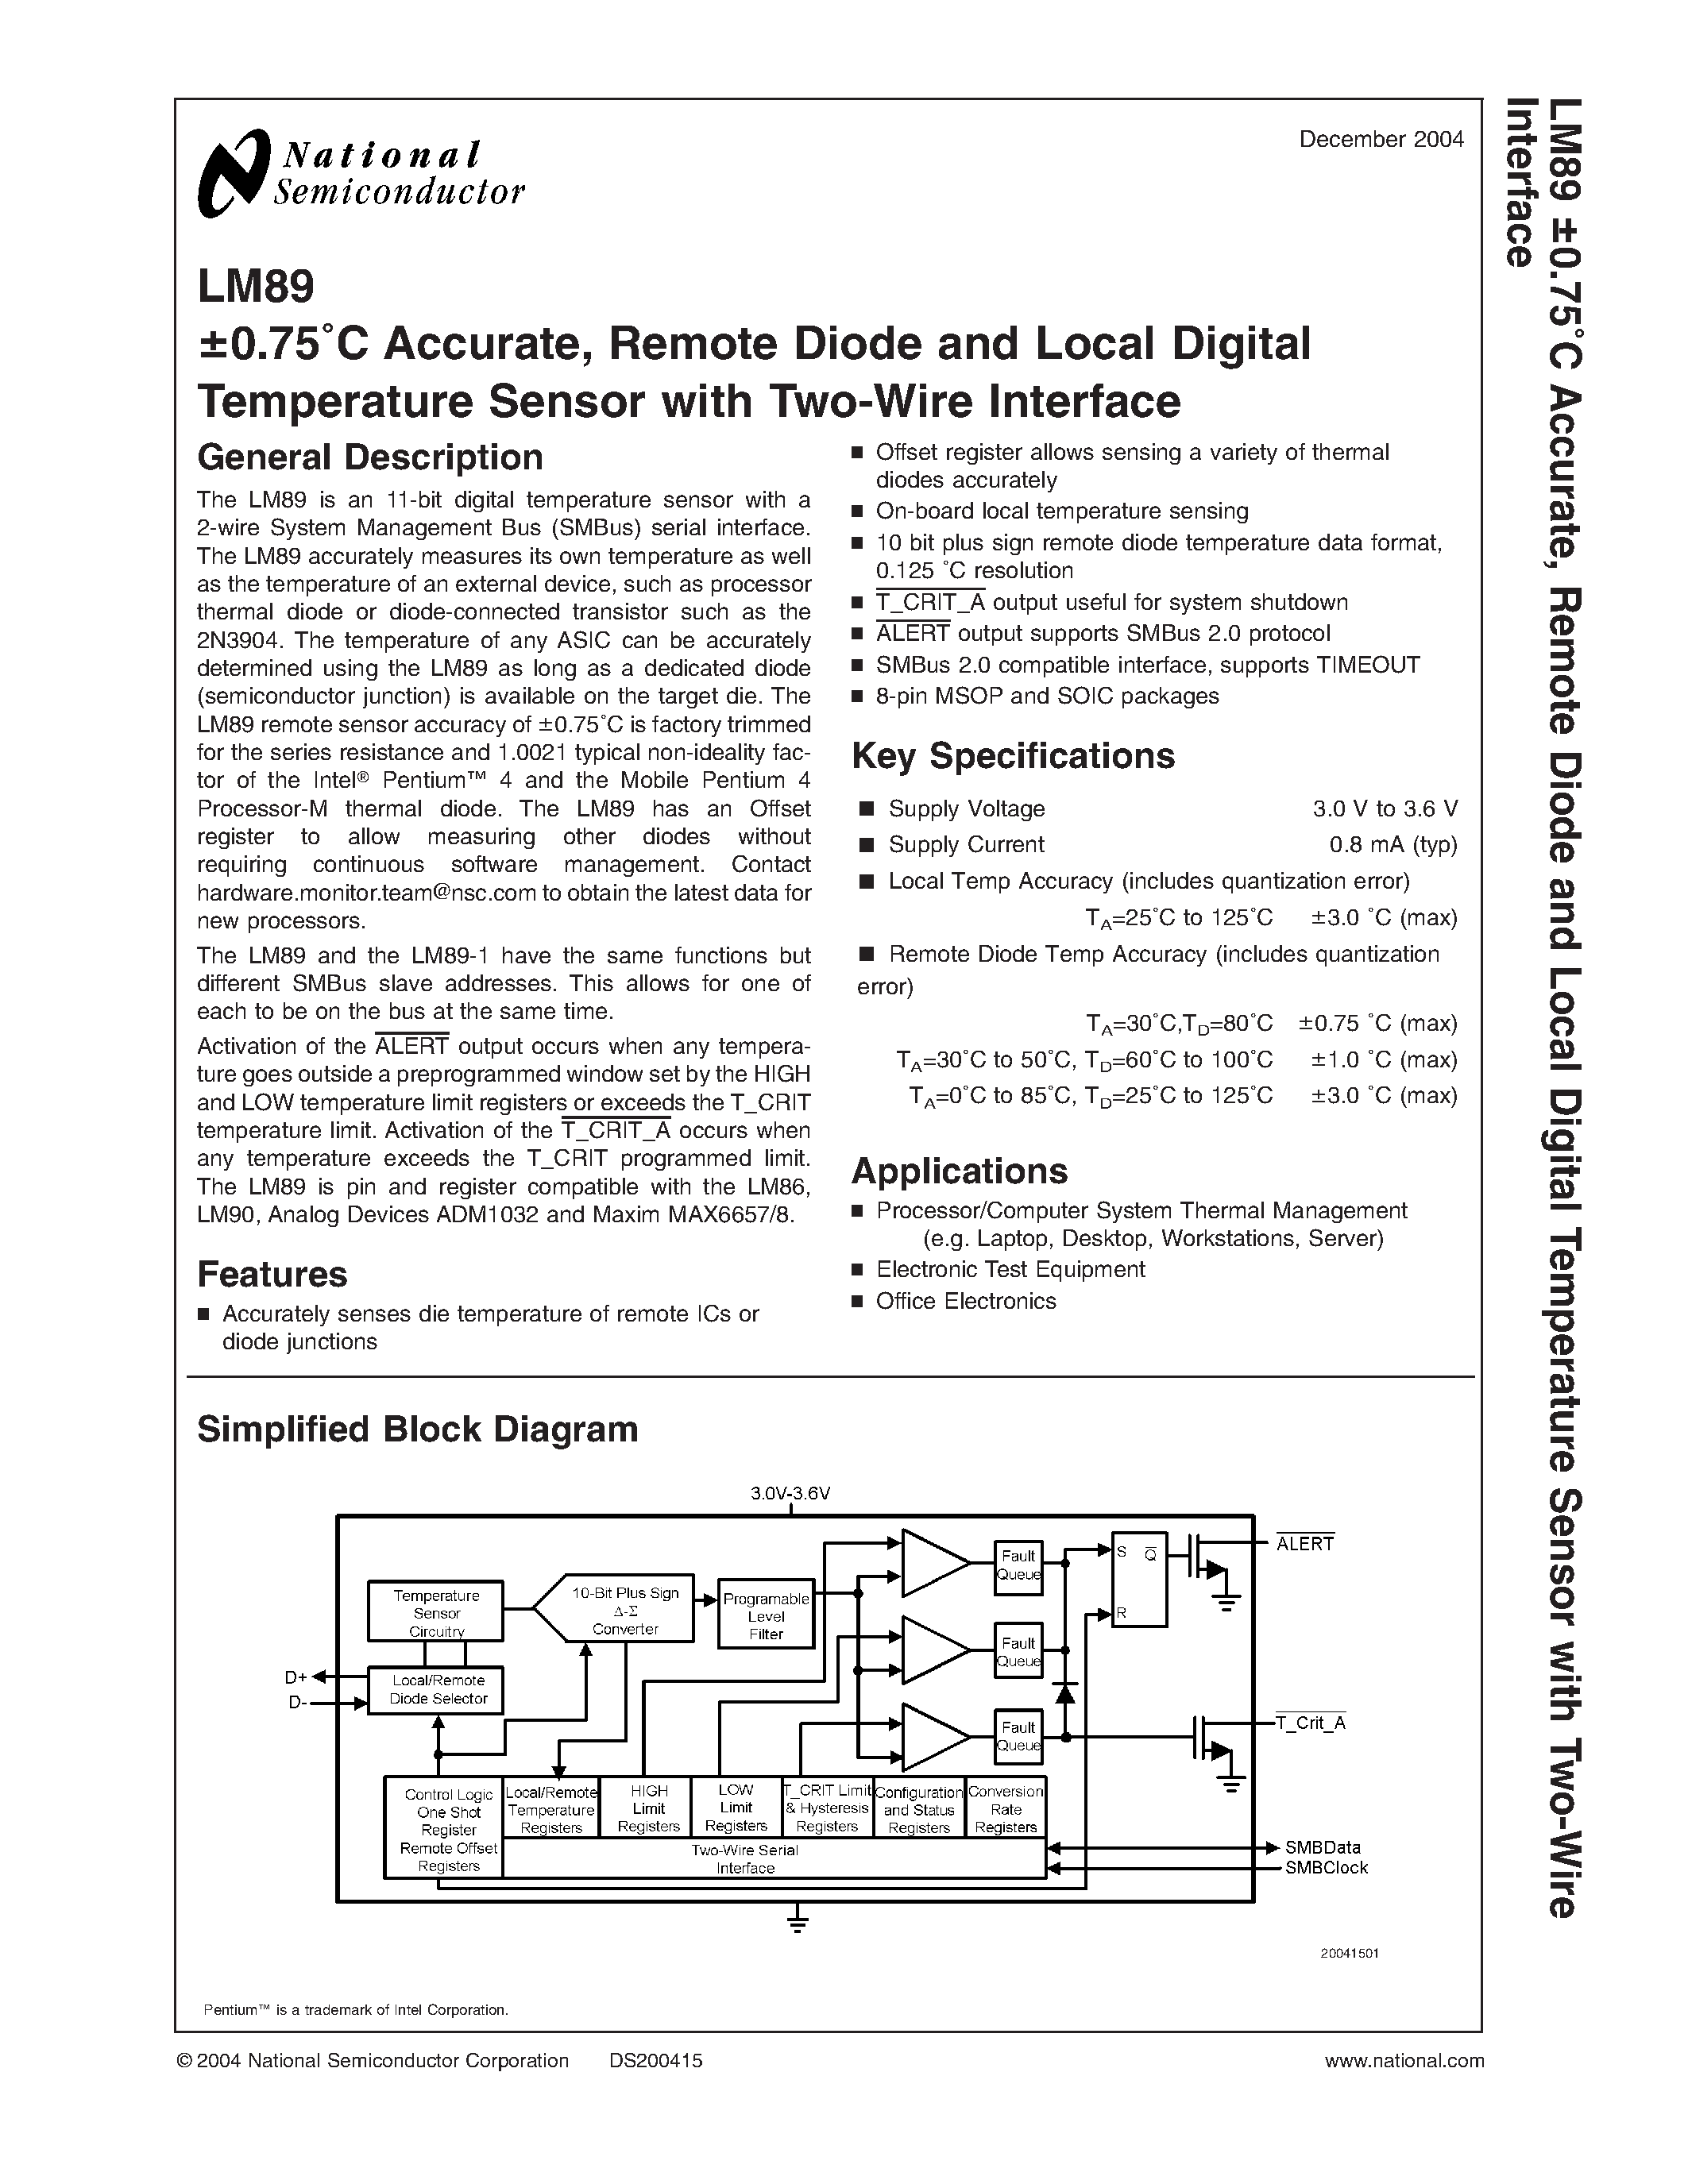 Datasheet LM89 - 0.75C Accurate / Remote Diode and Local Digital Temperature Sensor with Two-Wire Interface page 1